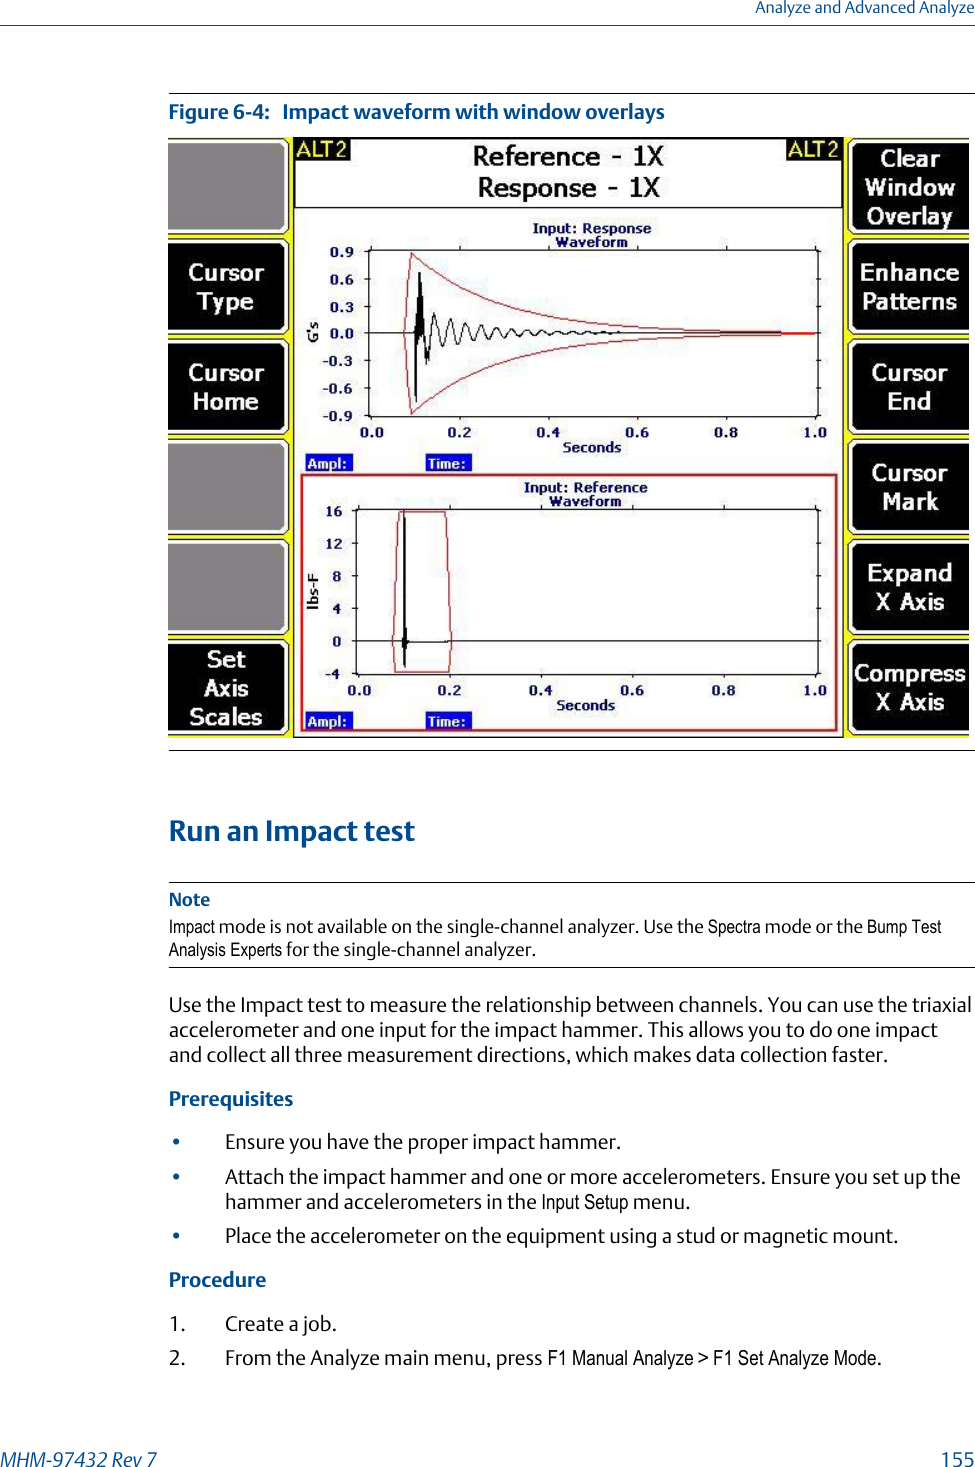 Impact waveform with window overlaysFigure 6-4:   Run an Impact testNoteImpact mode is not available on the single-channel analyzer. Use the Spectra mode or the Bump TestAnalysis Experts for the single-channel analyzer.Use the Impact test to measure the relationship between channels. You can use the triaxialaccelerometer and one input for the impact hammer. This allows you to do one impactand collect all three measurement directions, which makes data collection faster.Prerequisites•Ensure you have the proper impact hammer.•Attach the impact hammer and one or more accelerometers. Ensure you set up thehammer and accelerometers in the Input Setup menu.•Place the accelerometer on the equipment using a stud or magnetic mount.Procedure1. Create a job.2. From the Analyze main menu, press F1 Manual Analyze &gt; F1 Set Analyze Mode.Analyze and Advanced AnalyzeMHM-97432 Rev 7  155